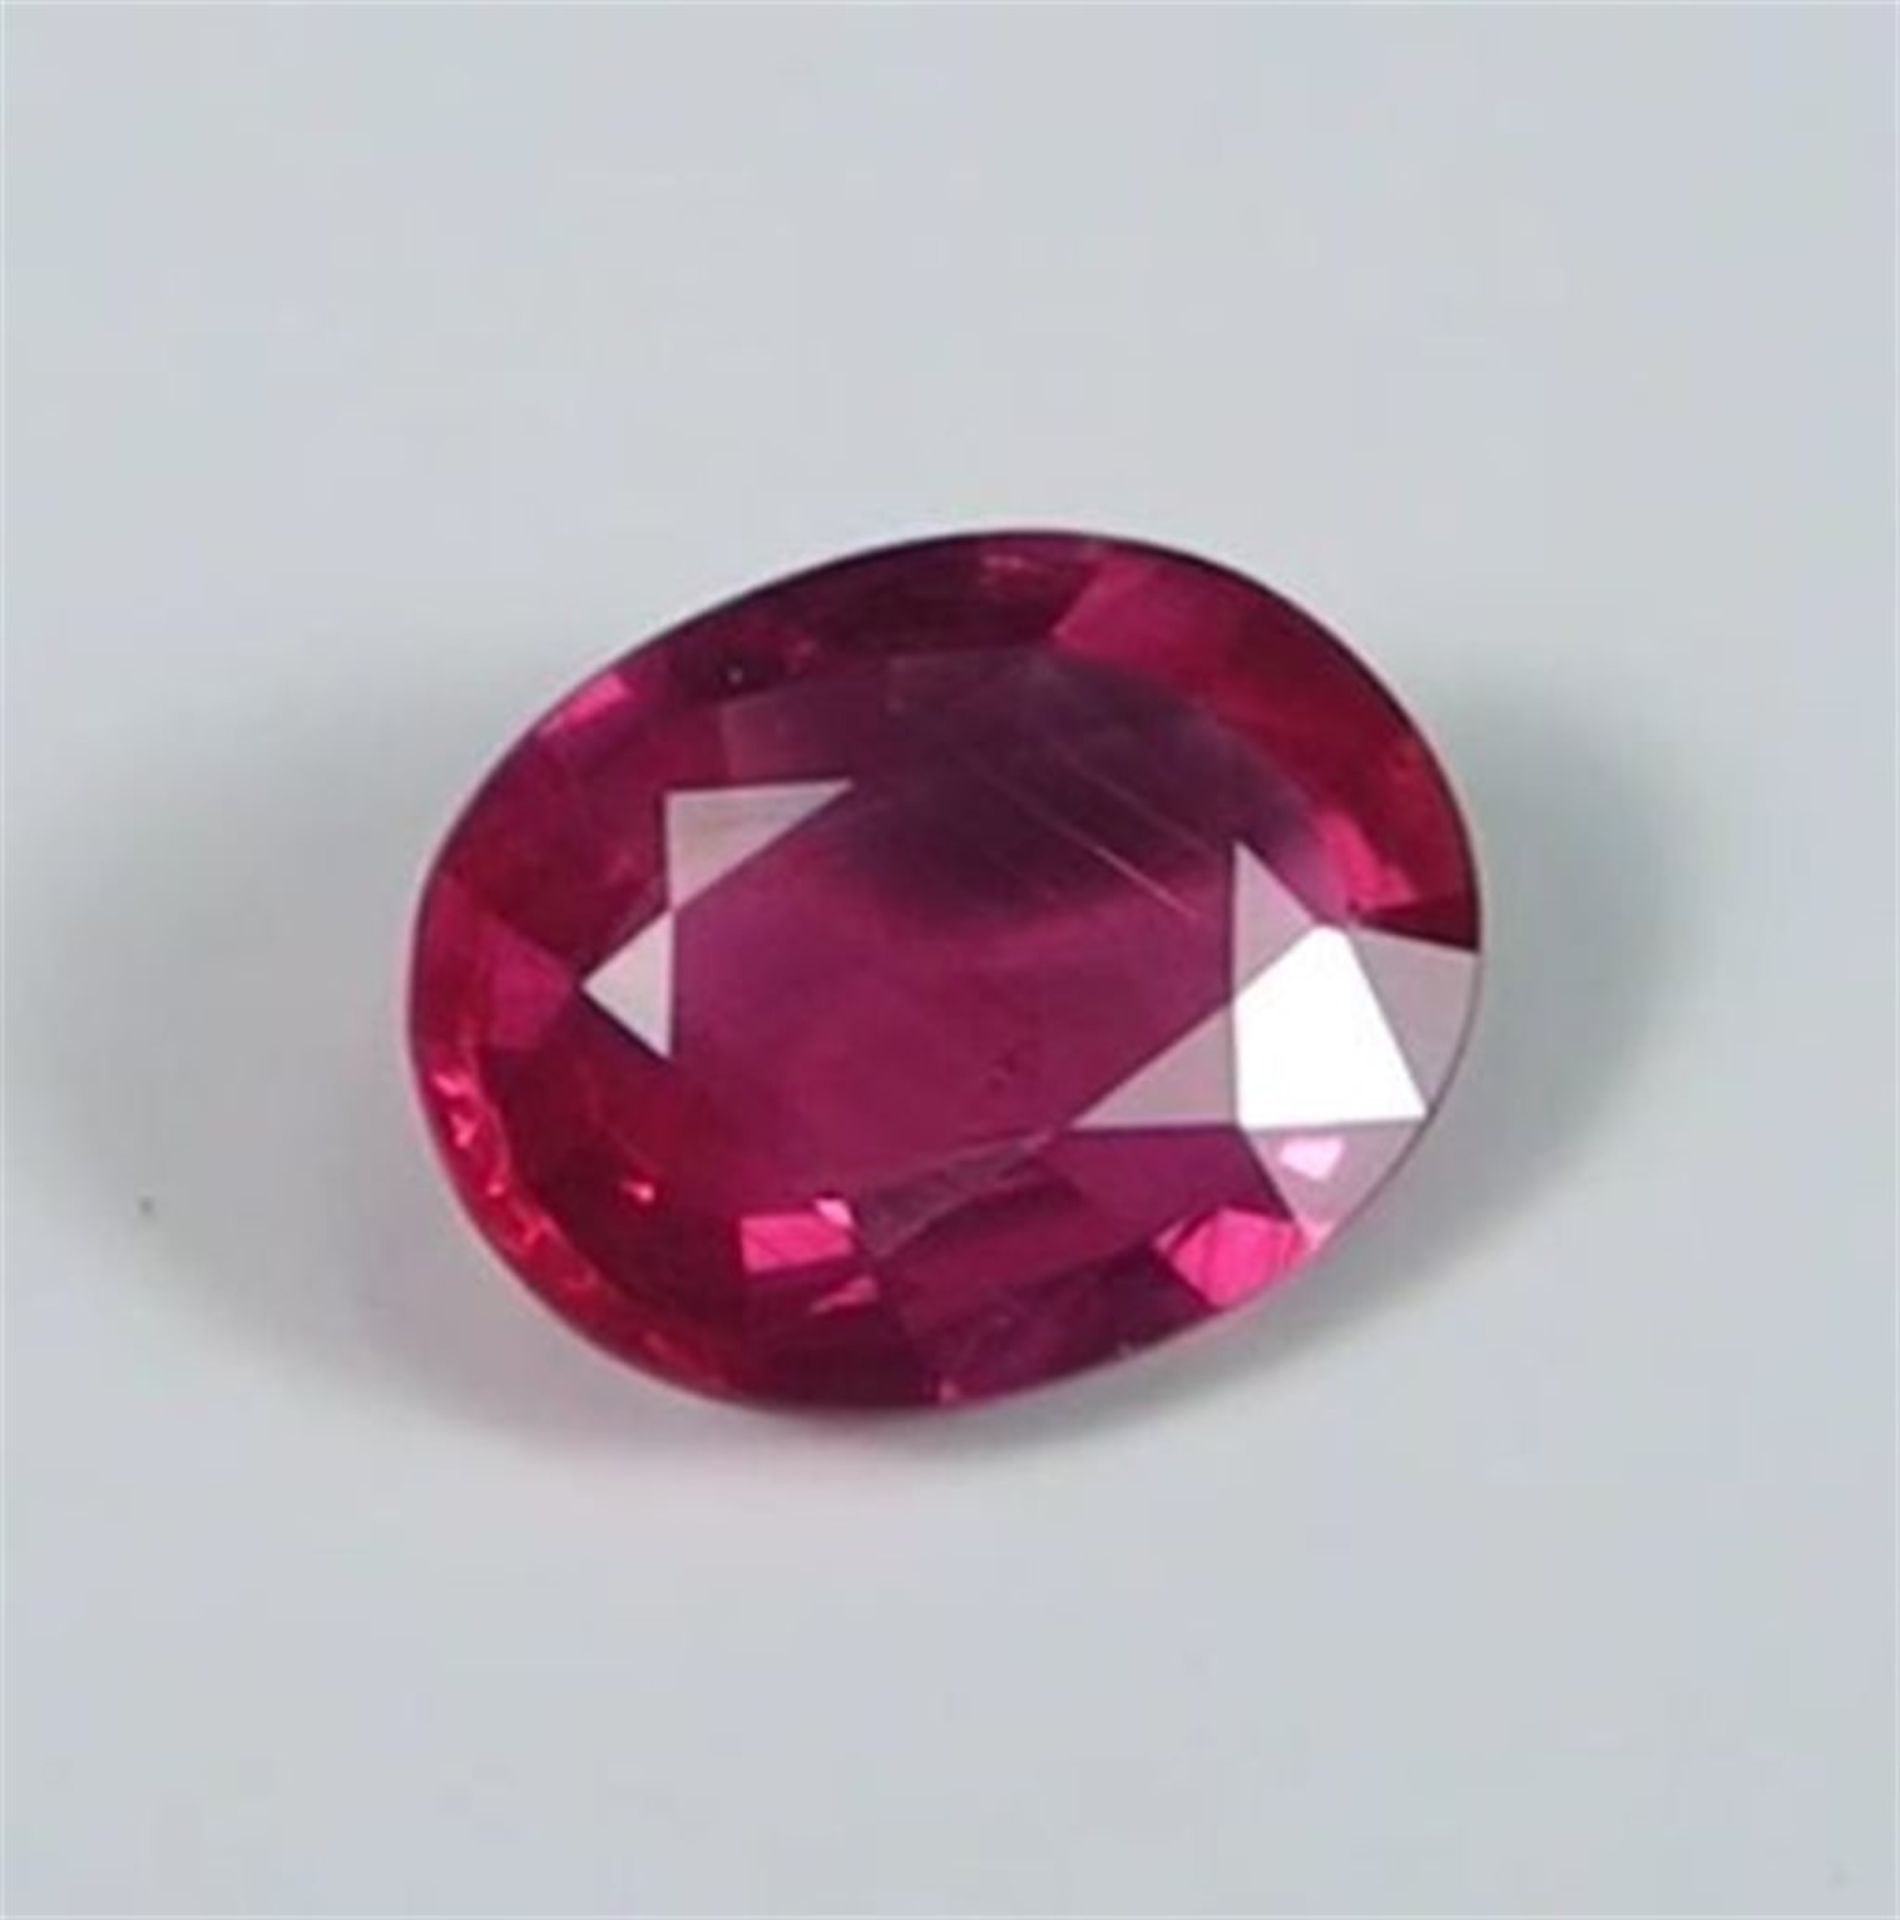 GIA Certified 1.22 ct. Untreated Ruby - BURMA - Image 4 of 10